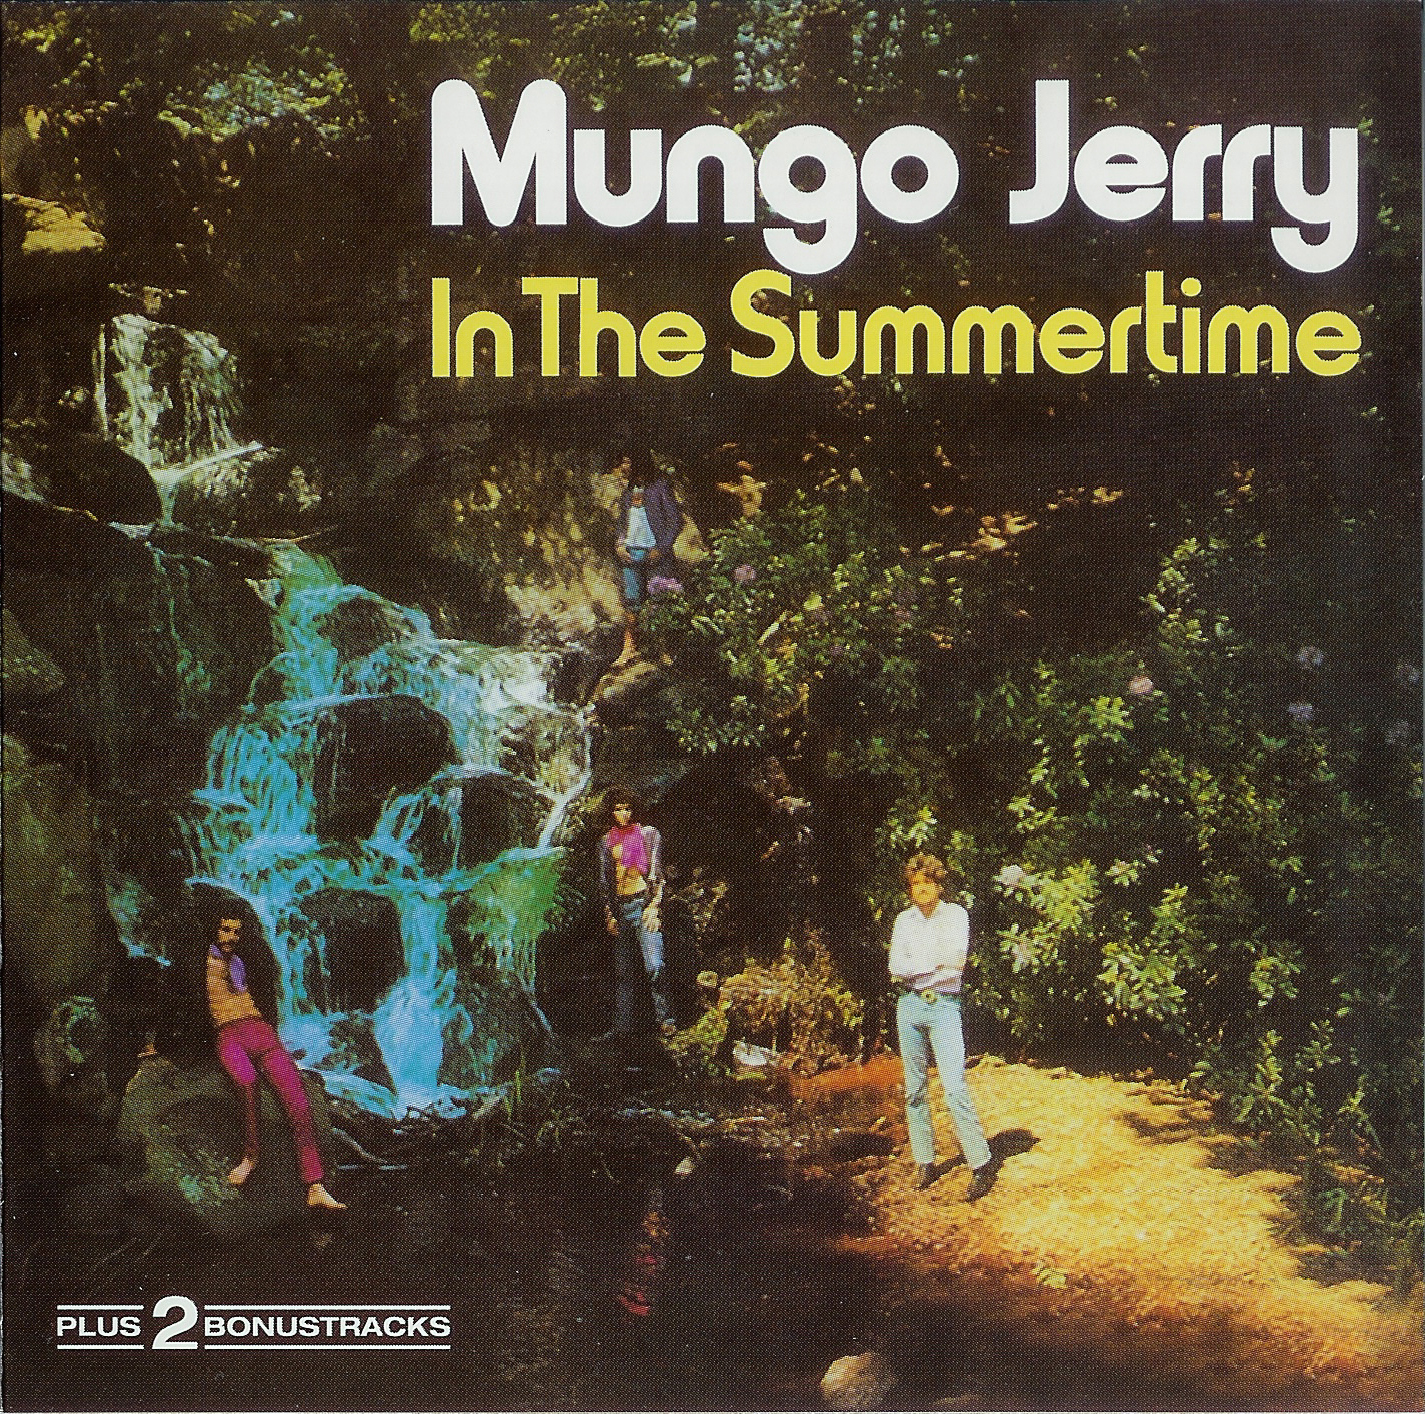 Mungo jerry in the summertime. Mungo Jerry in the Summertime 1970. Mungo Jerry 1970 - обложка CD. Mungo Jerry - in the Summertime - обложка CD. Mungo Jerry - in the Summertime Original 1970.